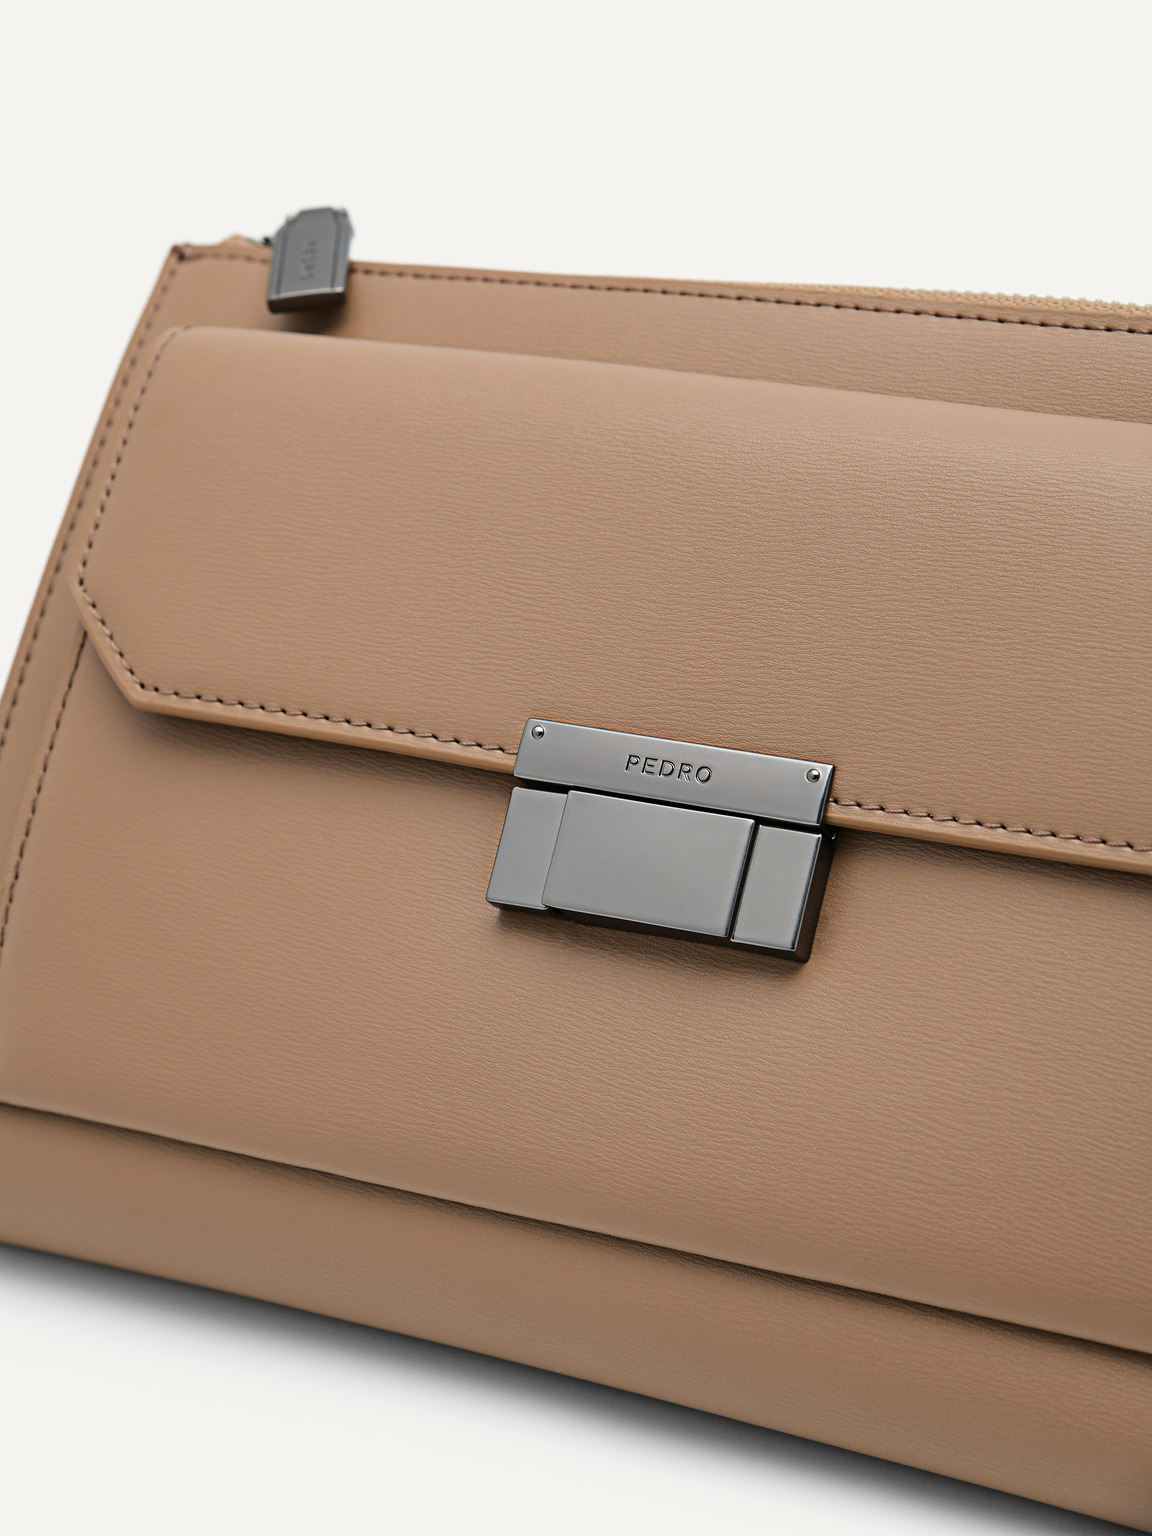 Henry Leather Clutch Bag, Taupe